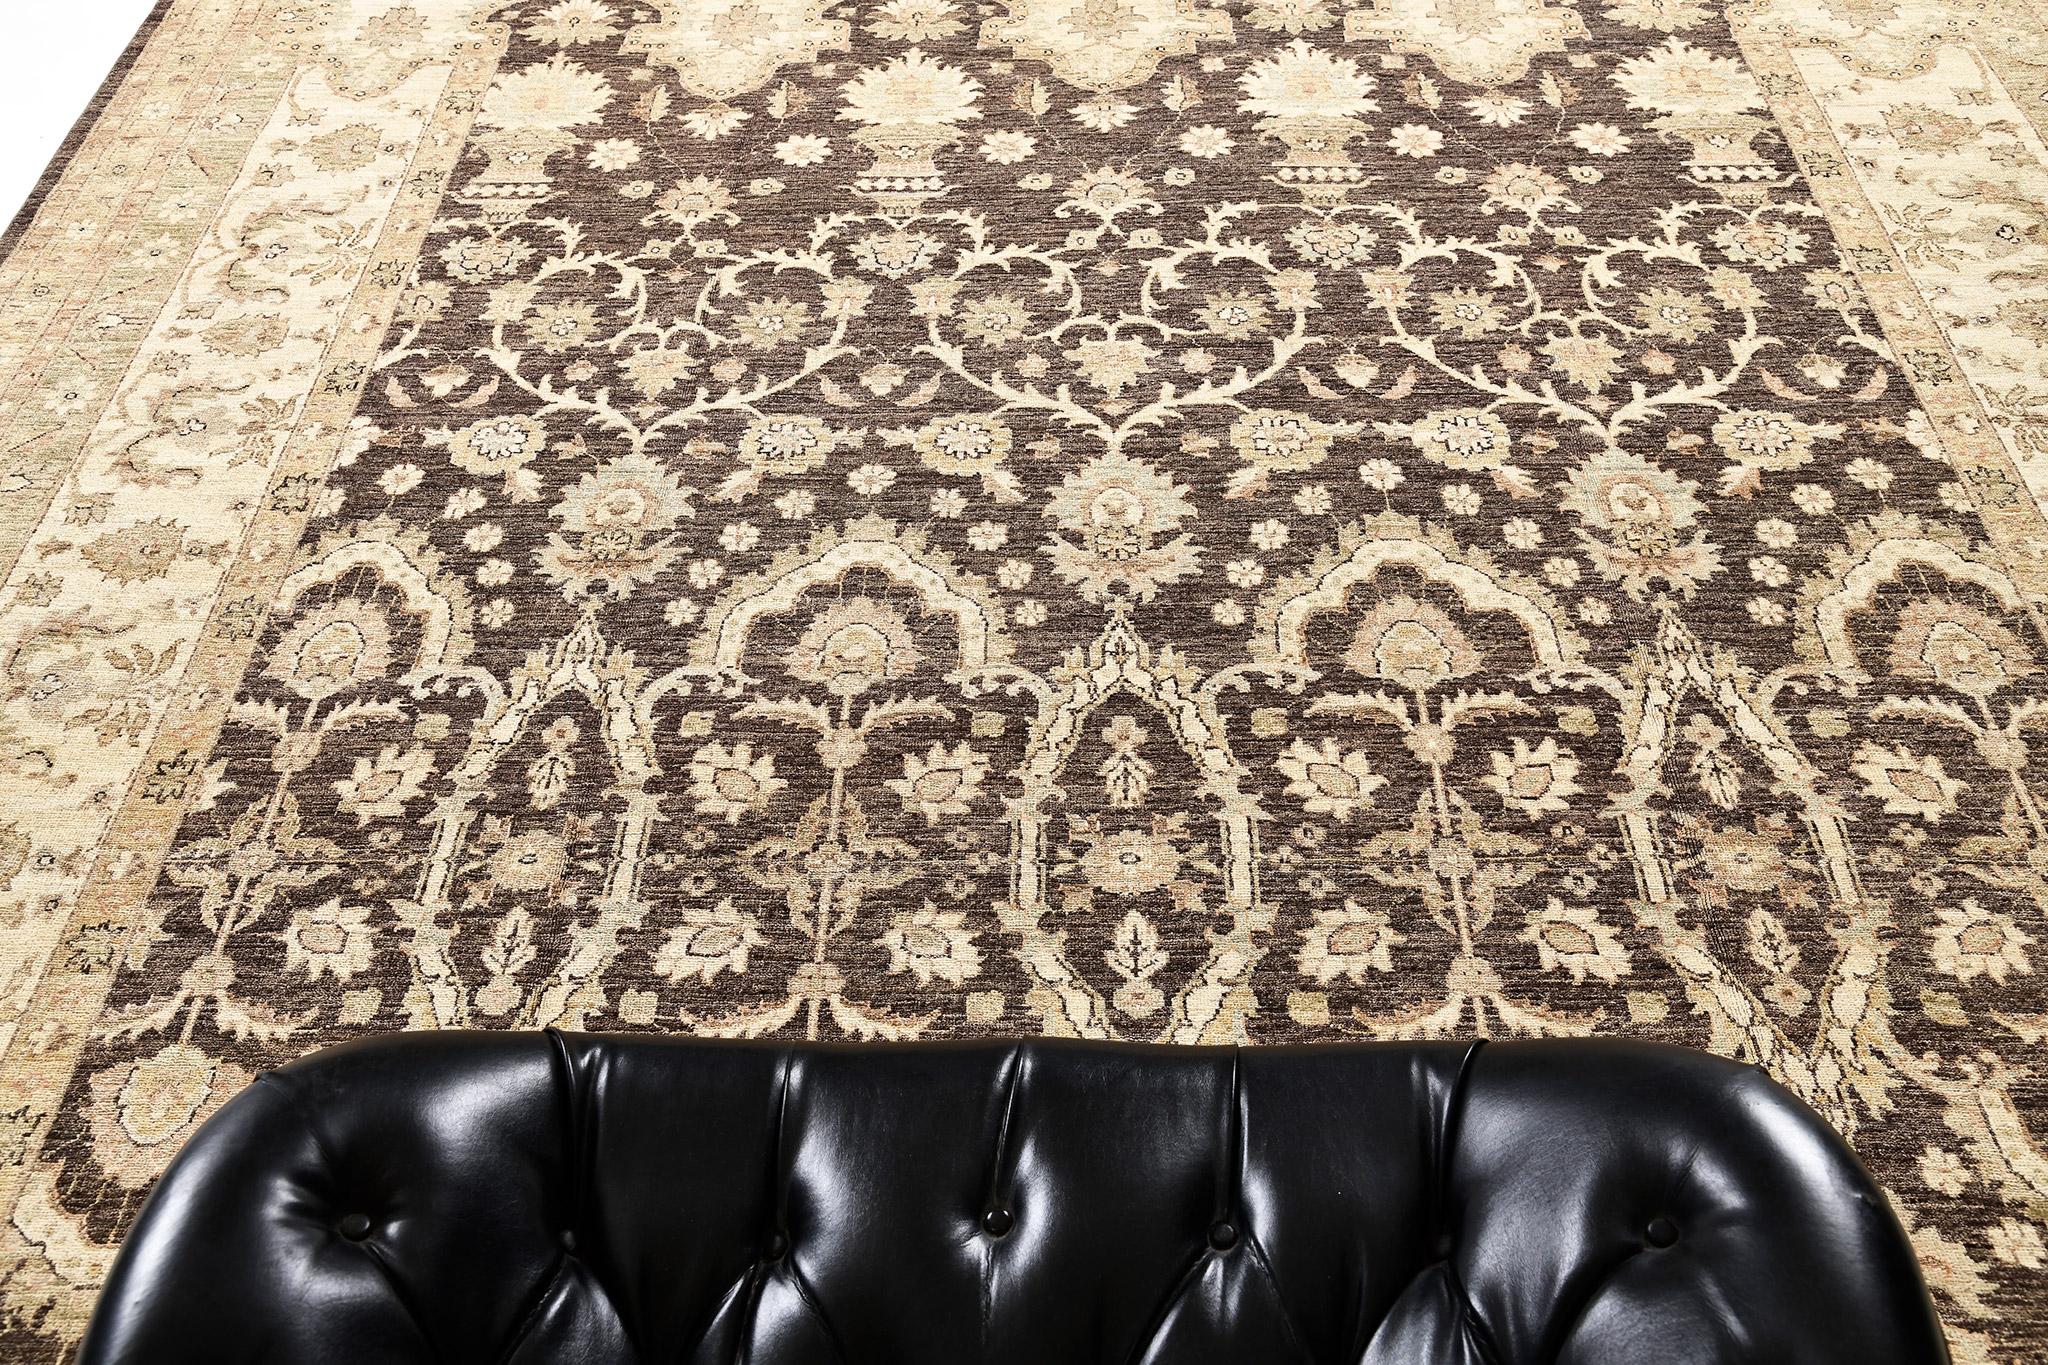 A gorgeous Amritsar design rug revival that features a dense, all-over arabesque, blooming palmettes, serrated leaves, leafy tendrils and amorphous botanical patterns. This exquisite rug is in the glorious shades of dark brown, sand and ivory which